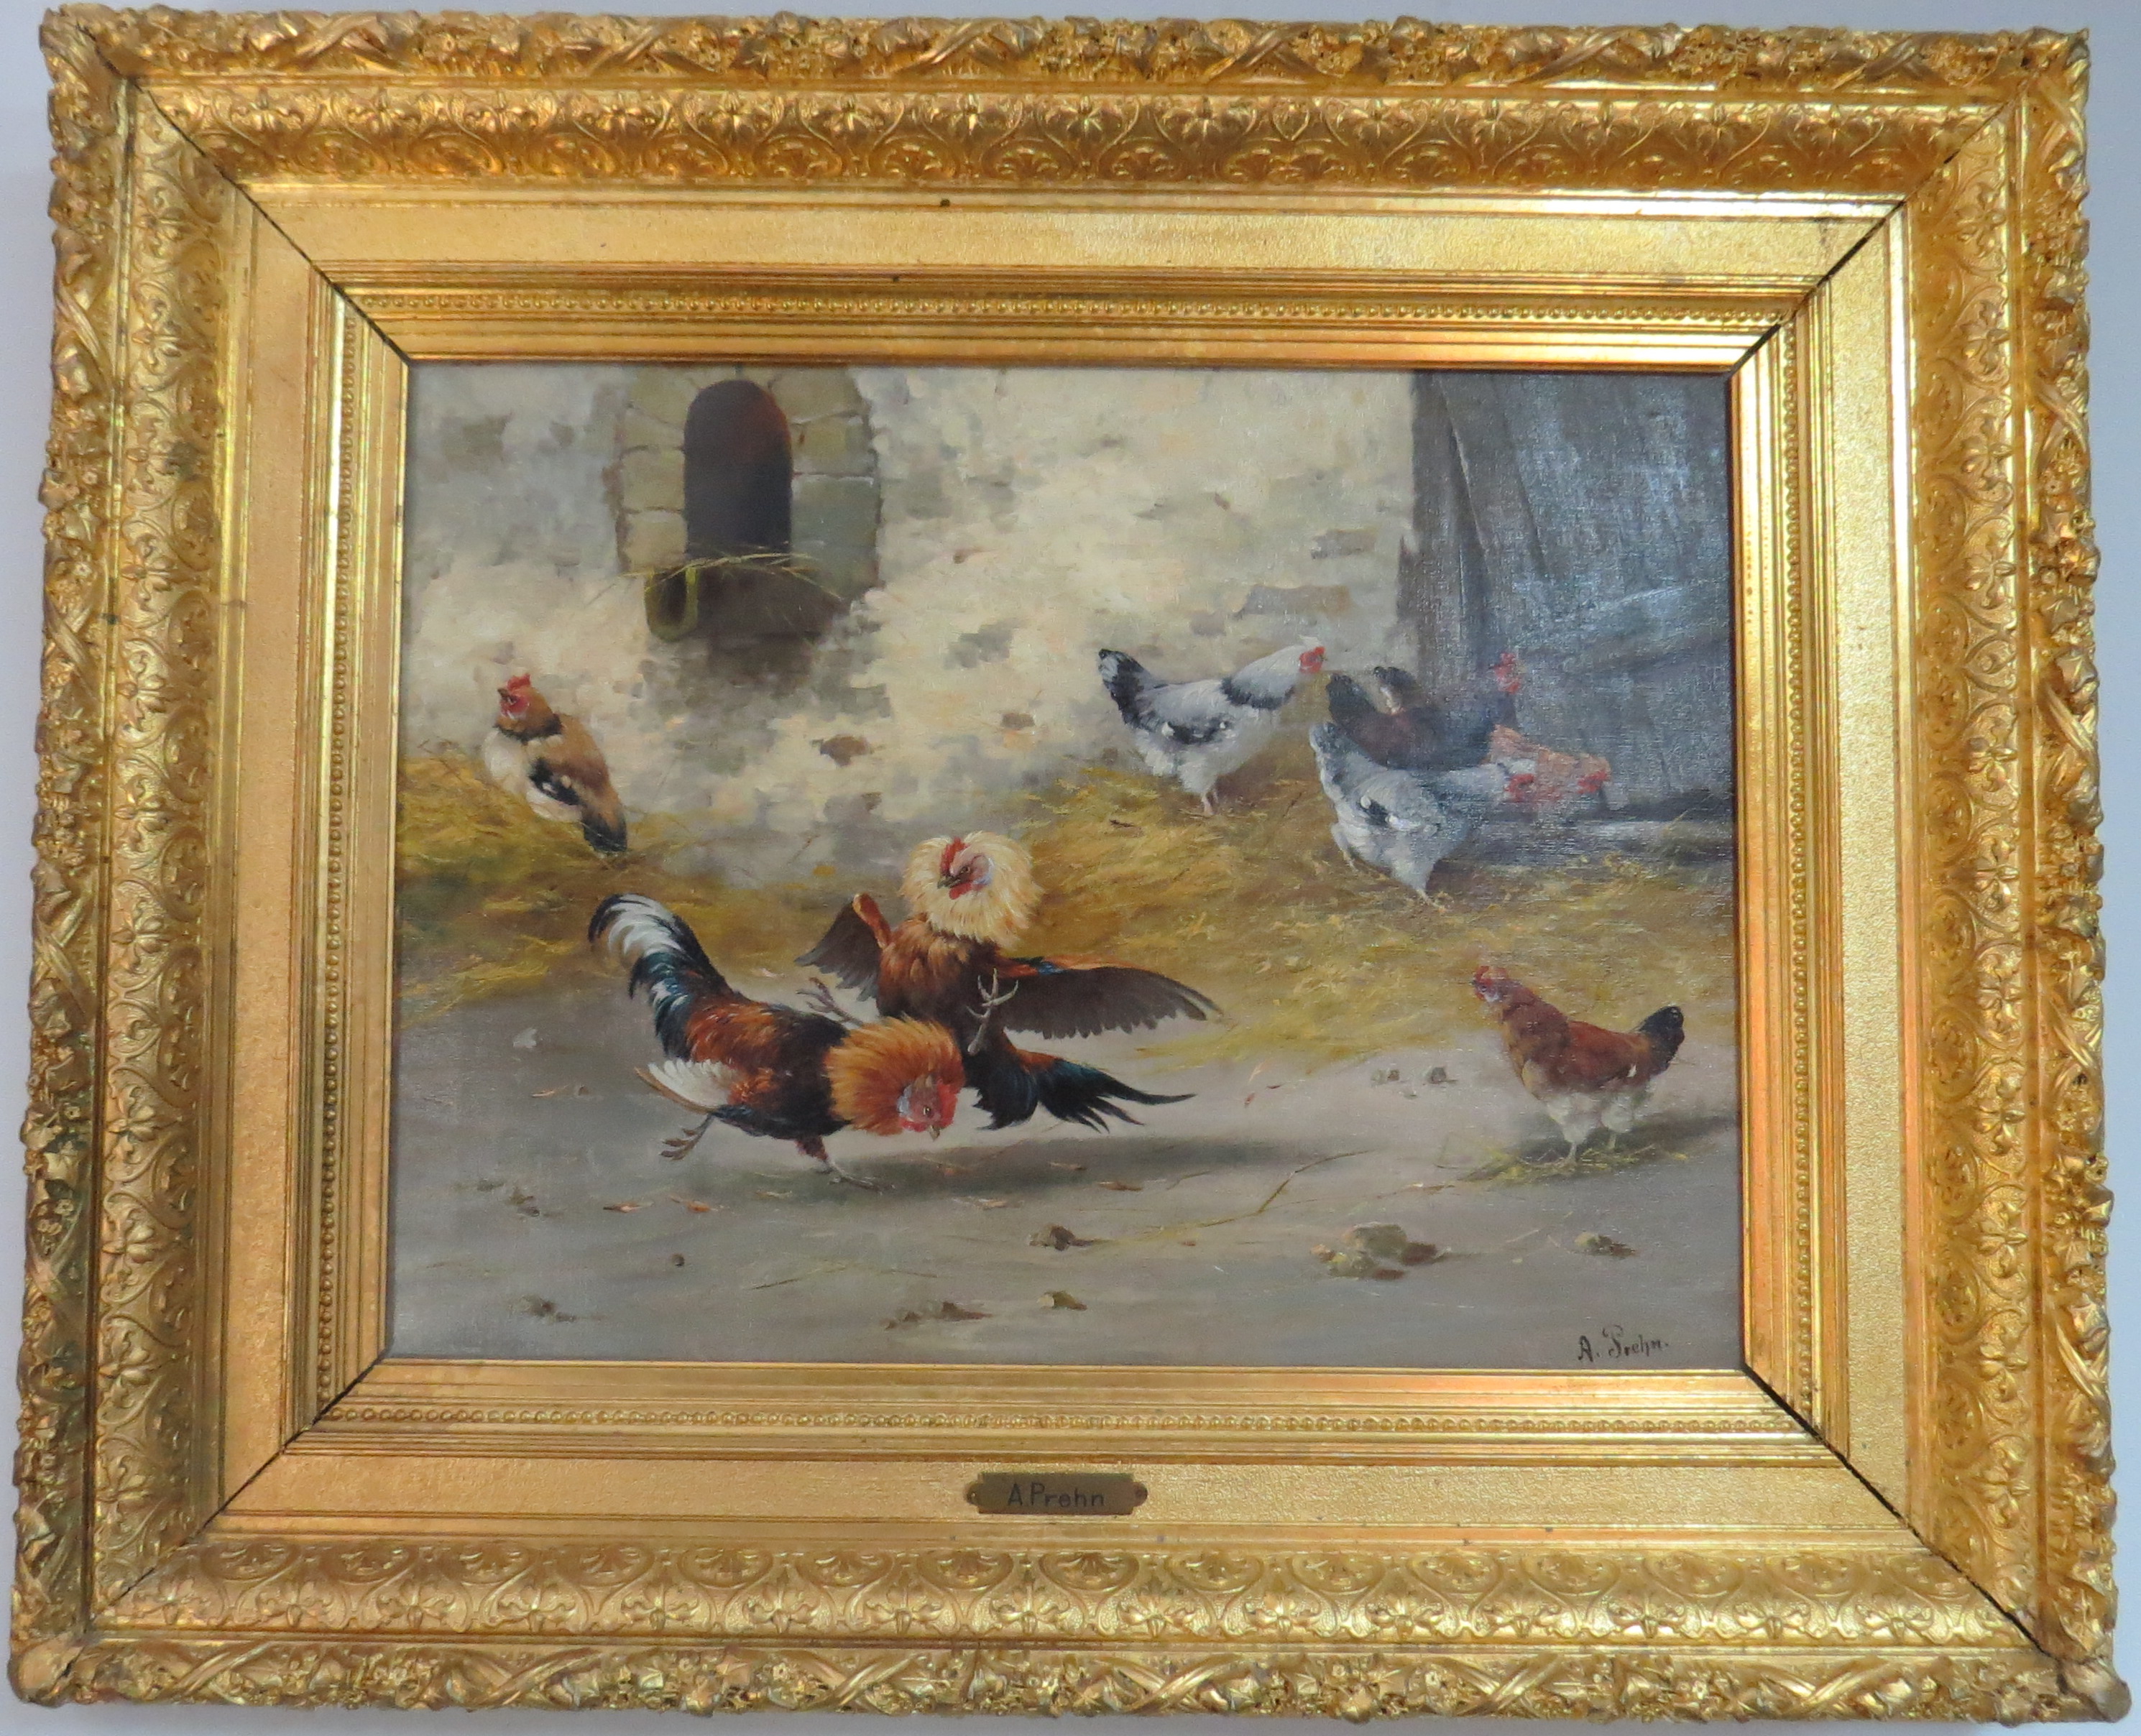 Oil on Canvas of a Stable Scene, Signed Andre Prehn